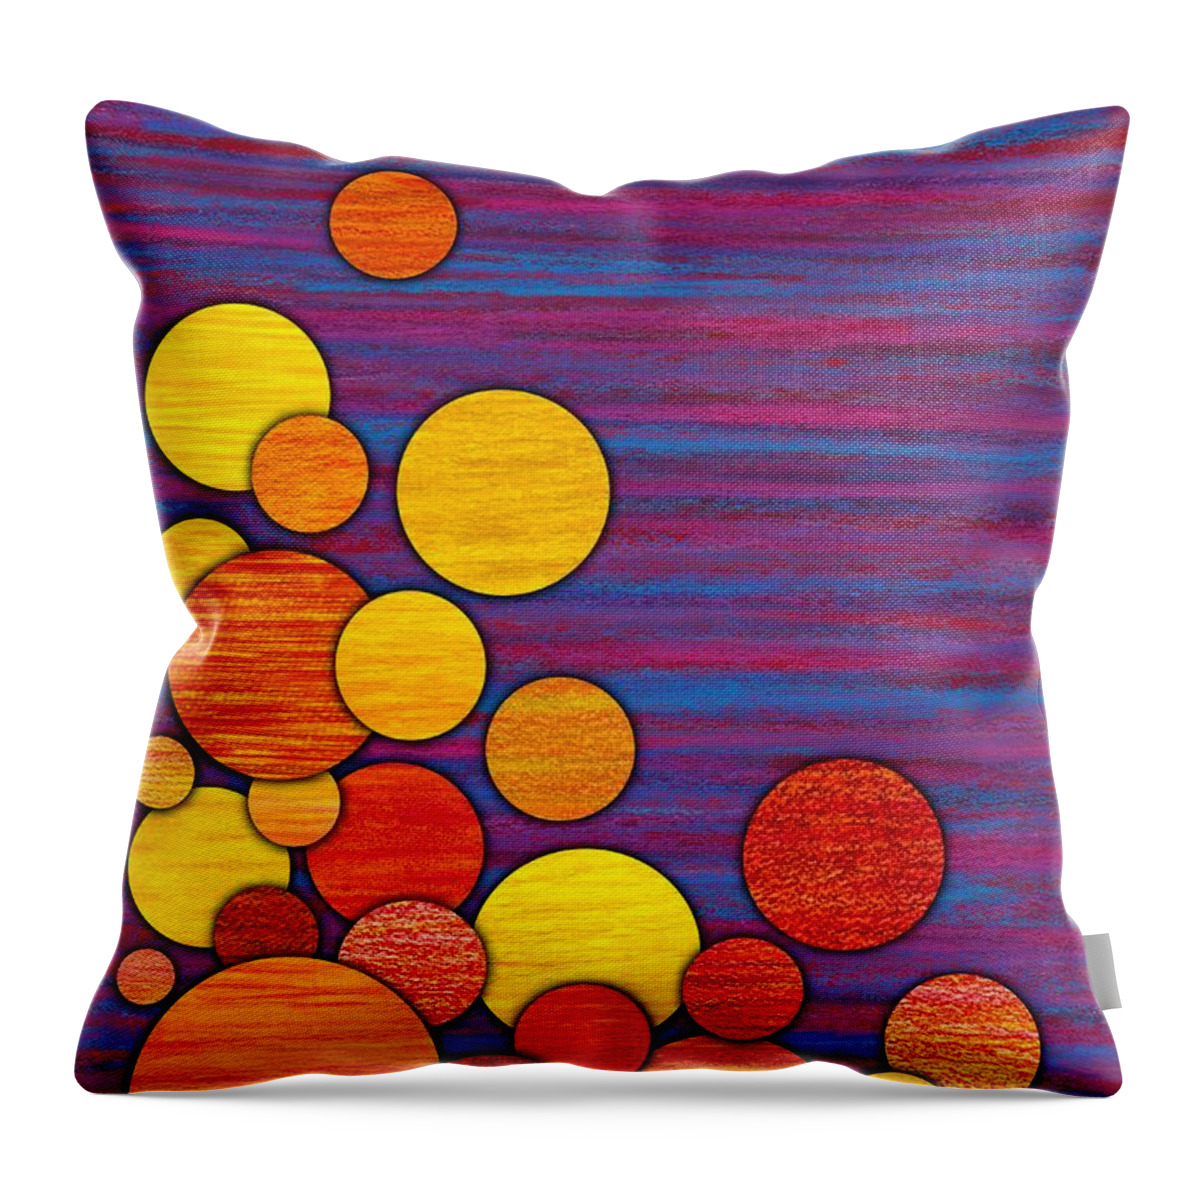 Colored Pencil Throw Pillow featuring the painting Accumulation by David K Small